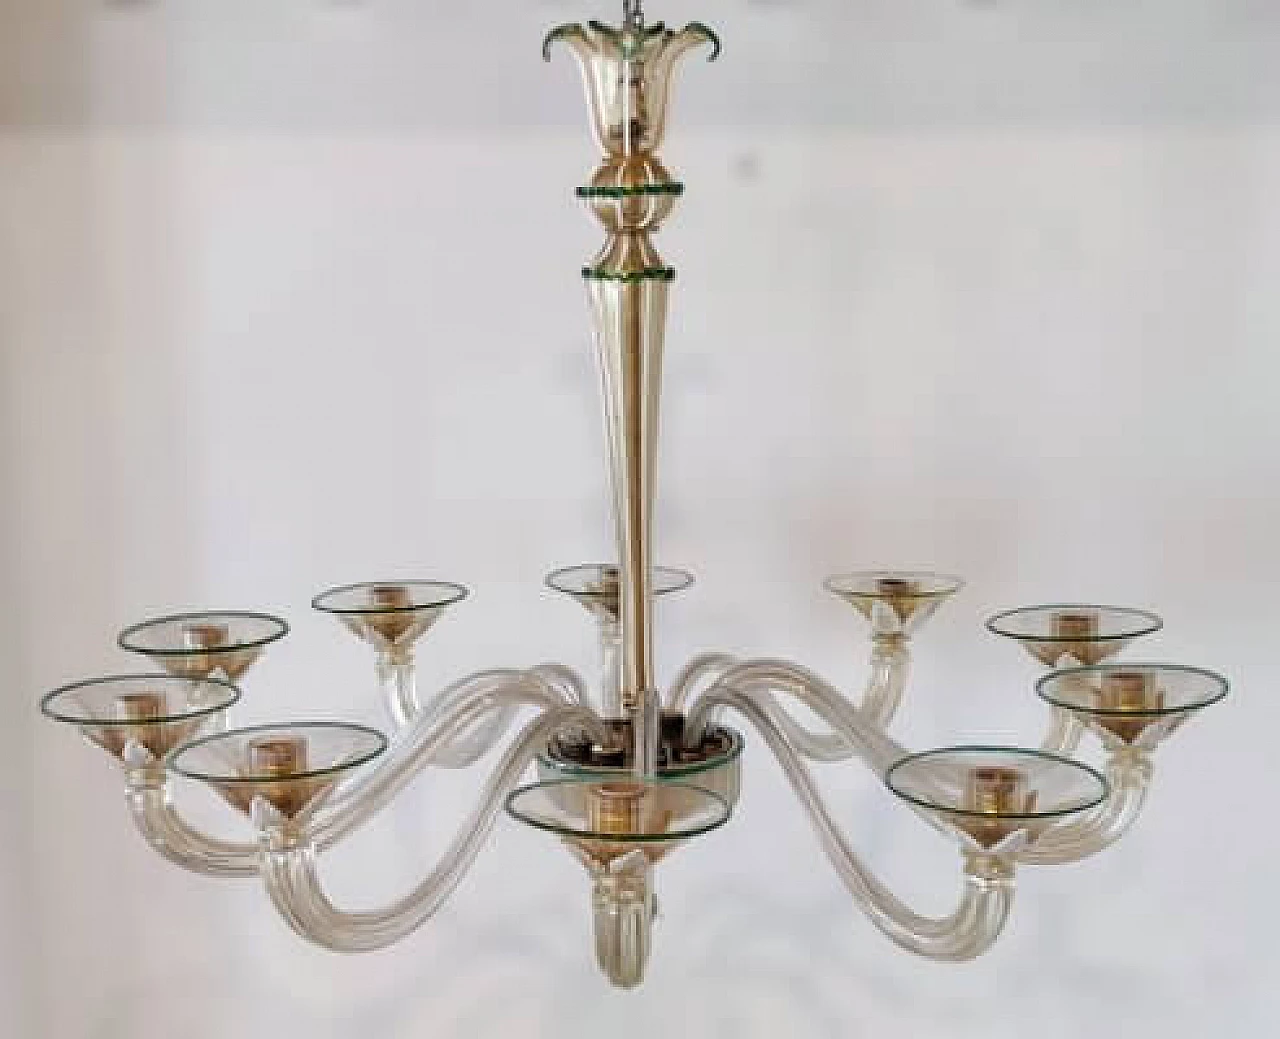 Murano glass chandelier by Barovier & Toso, 1930s 34